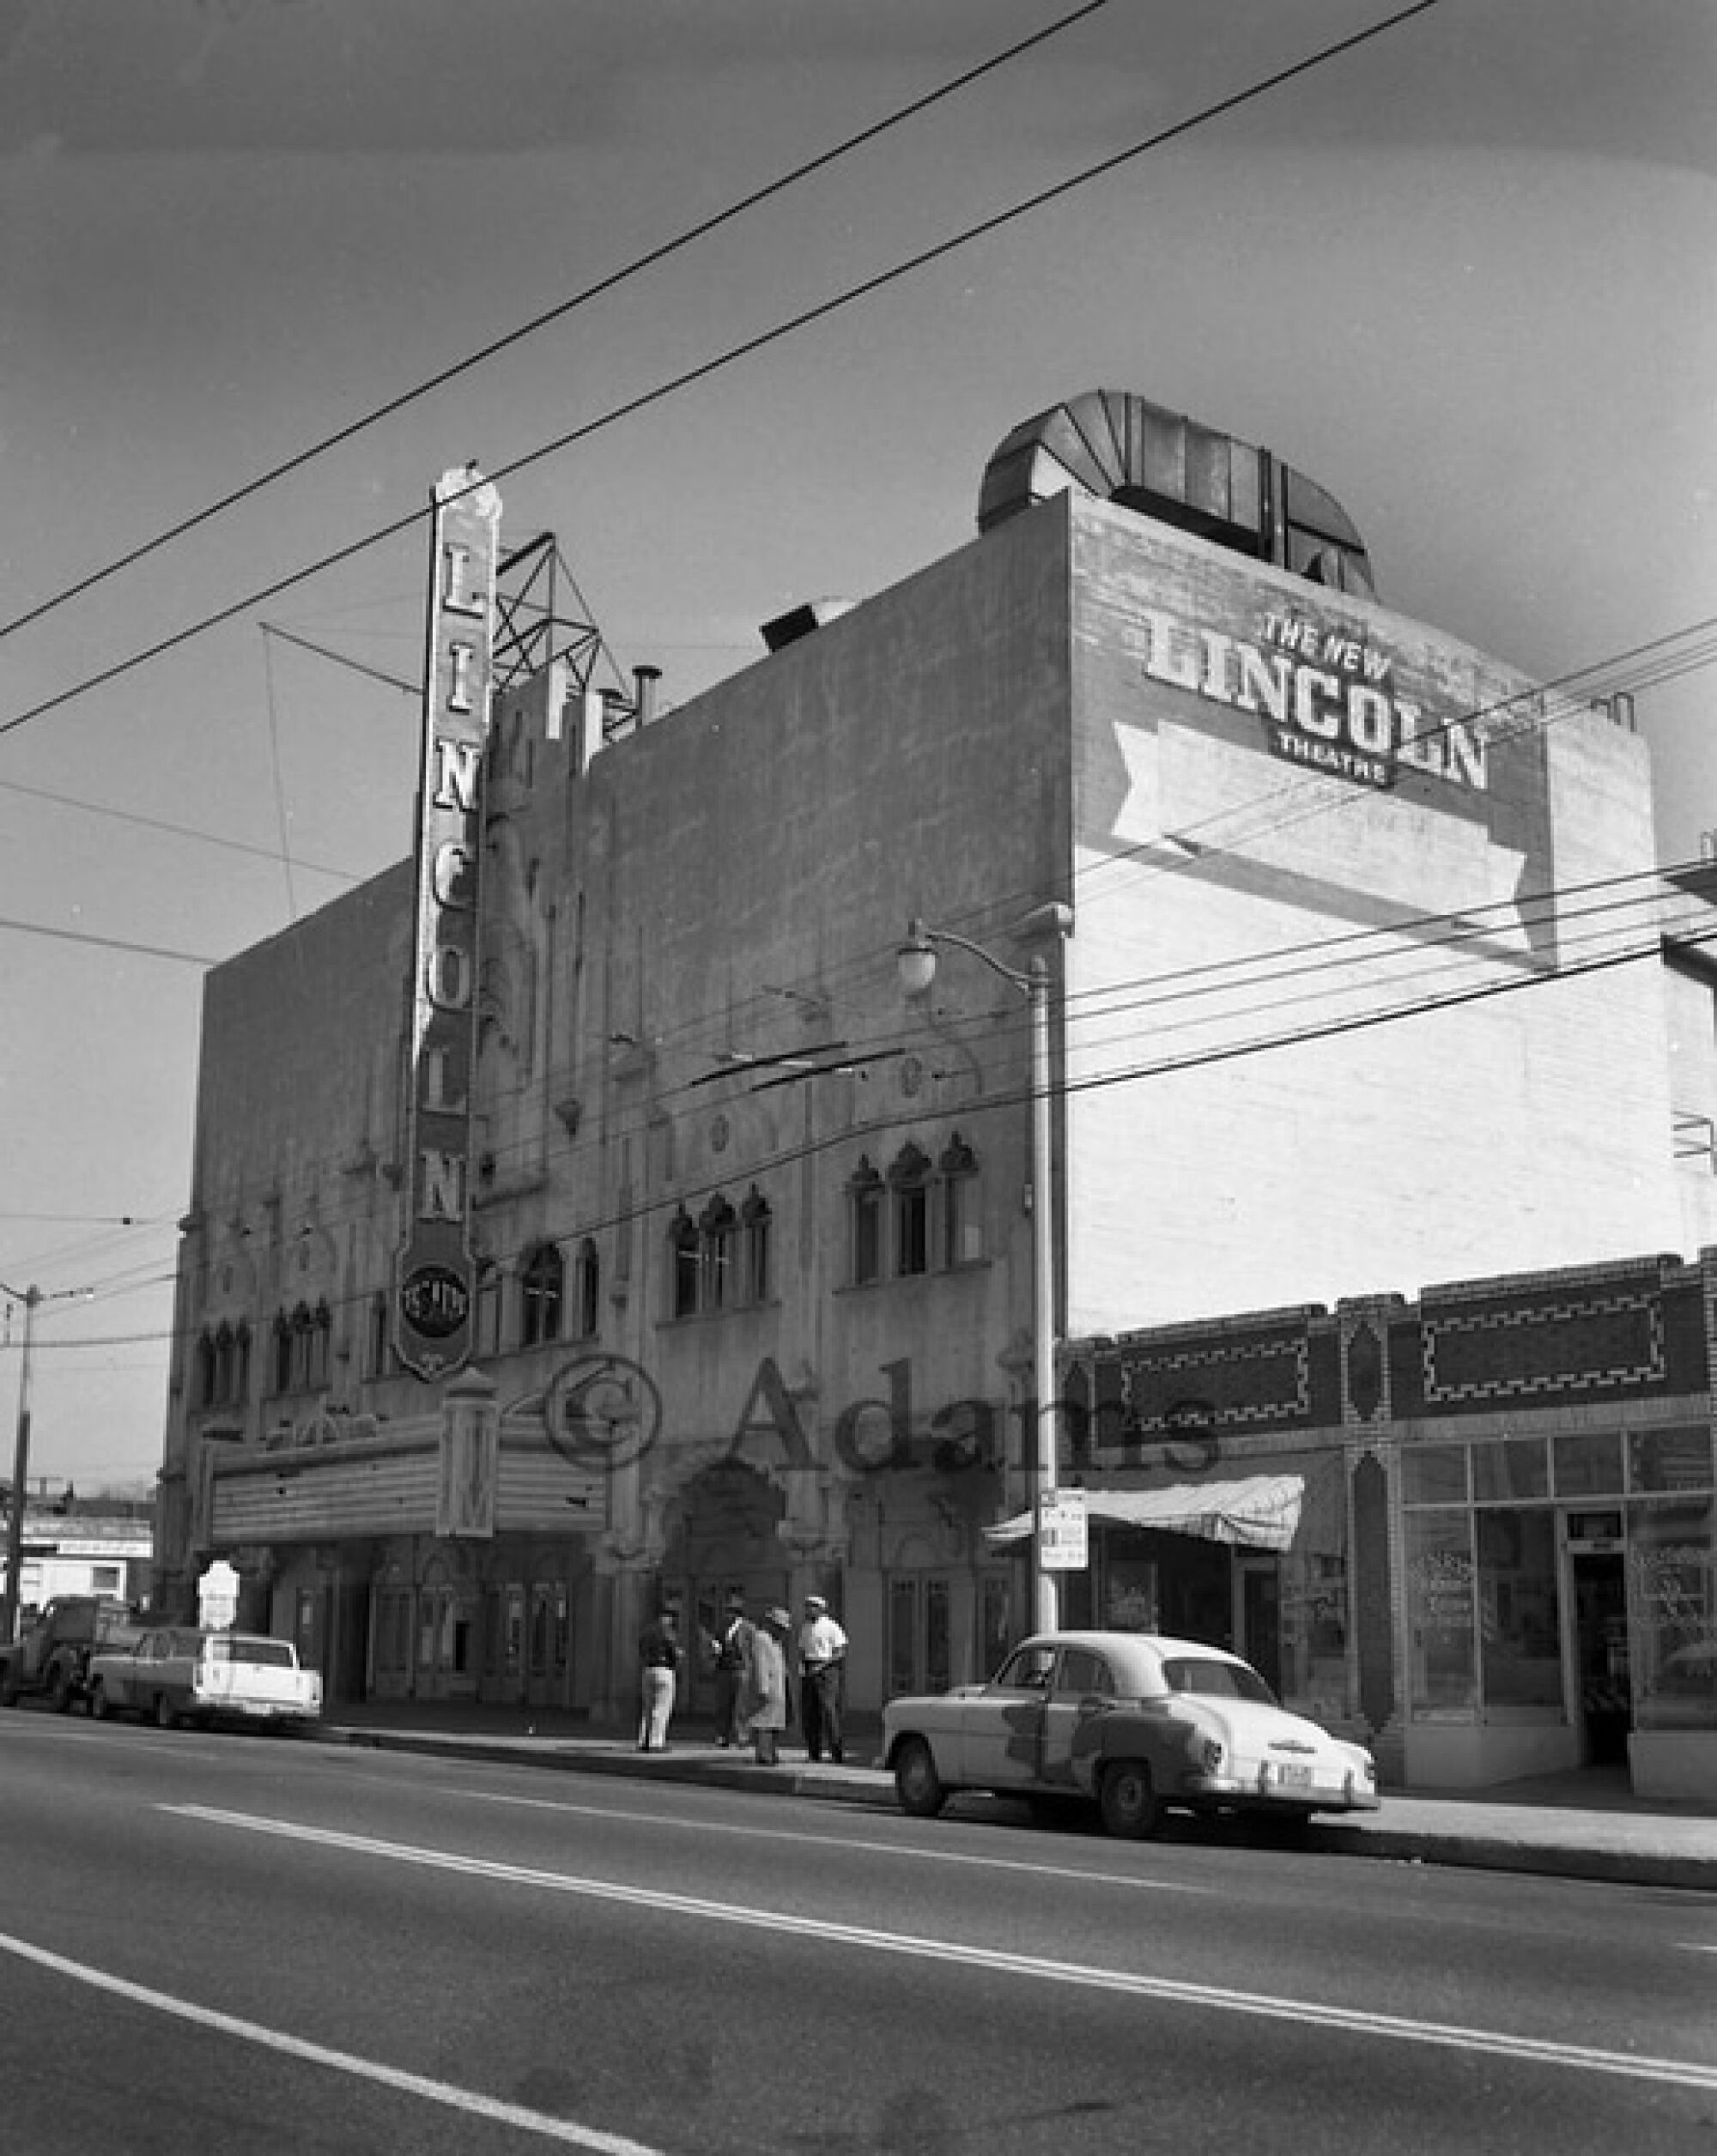 The Lincoln Theater on Central Avenue became known as the "West Coast Apollo."